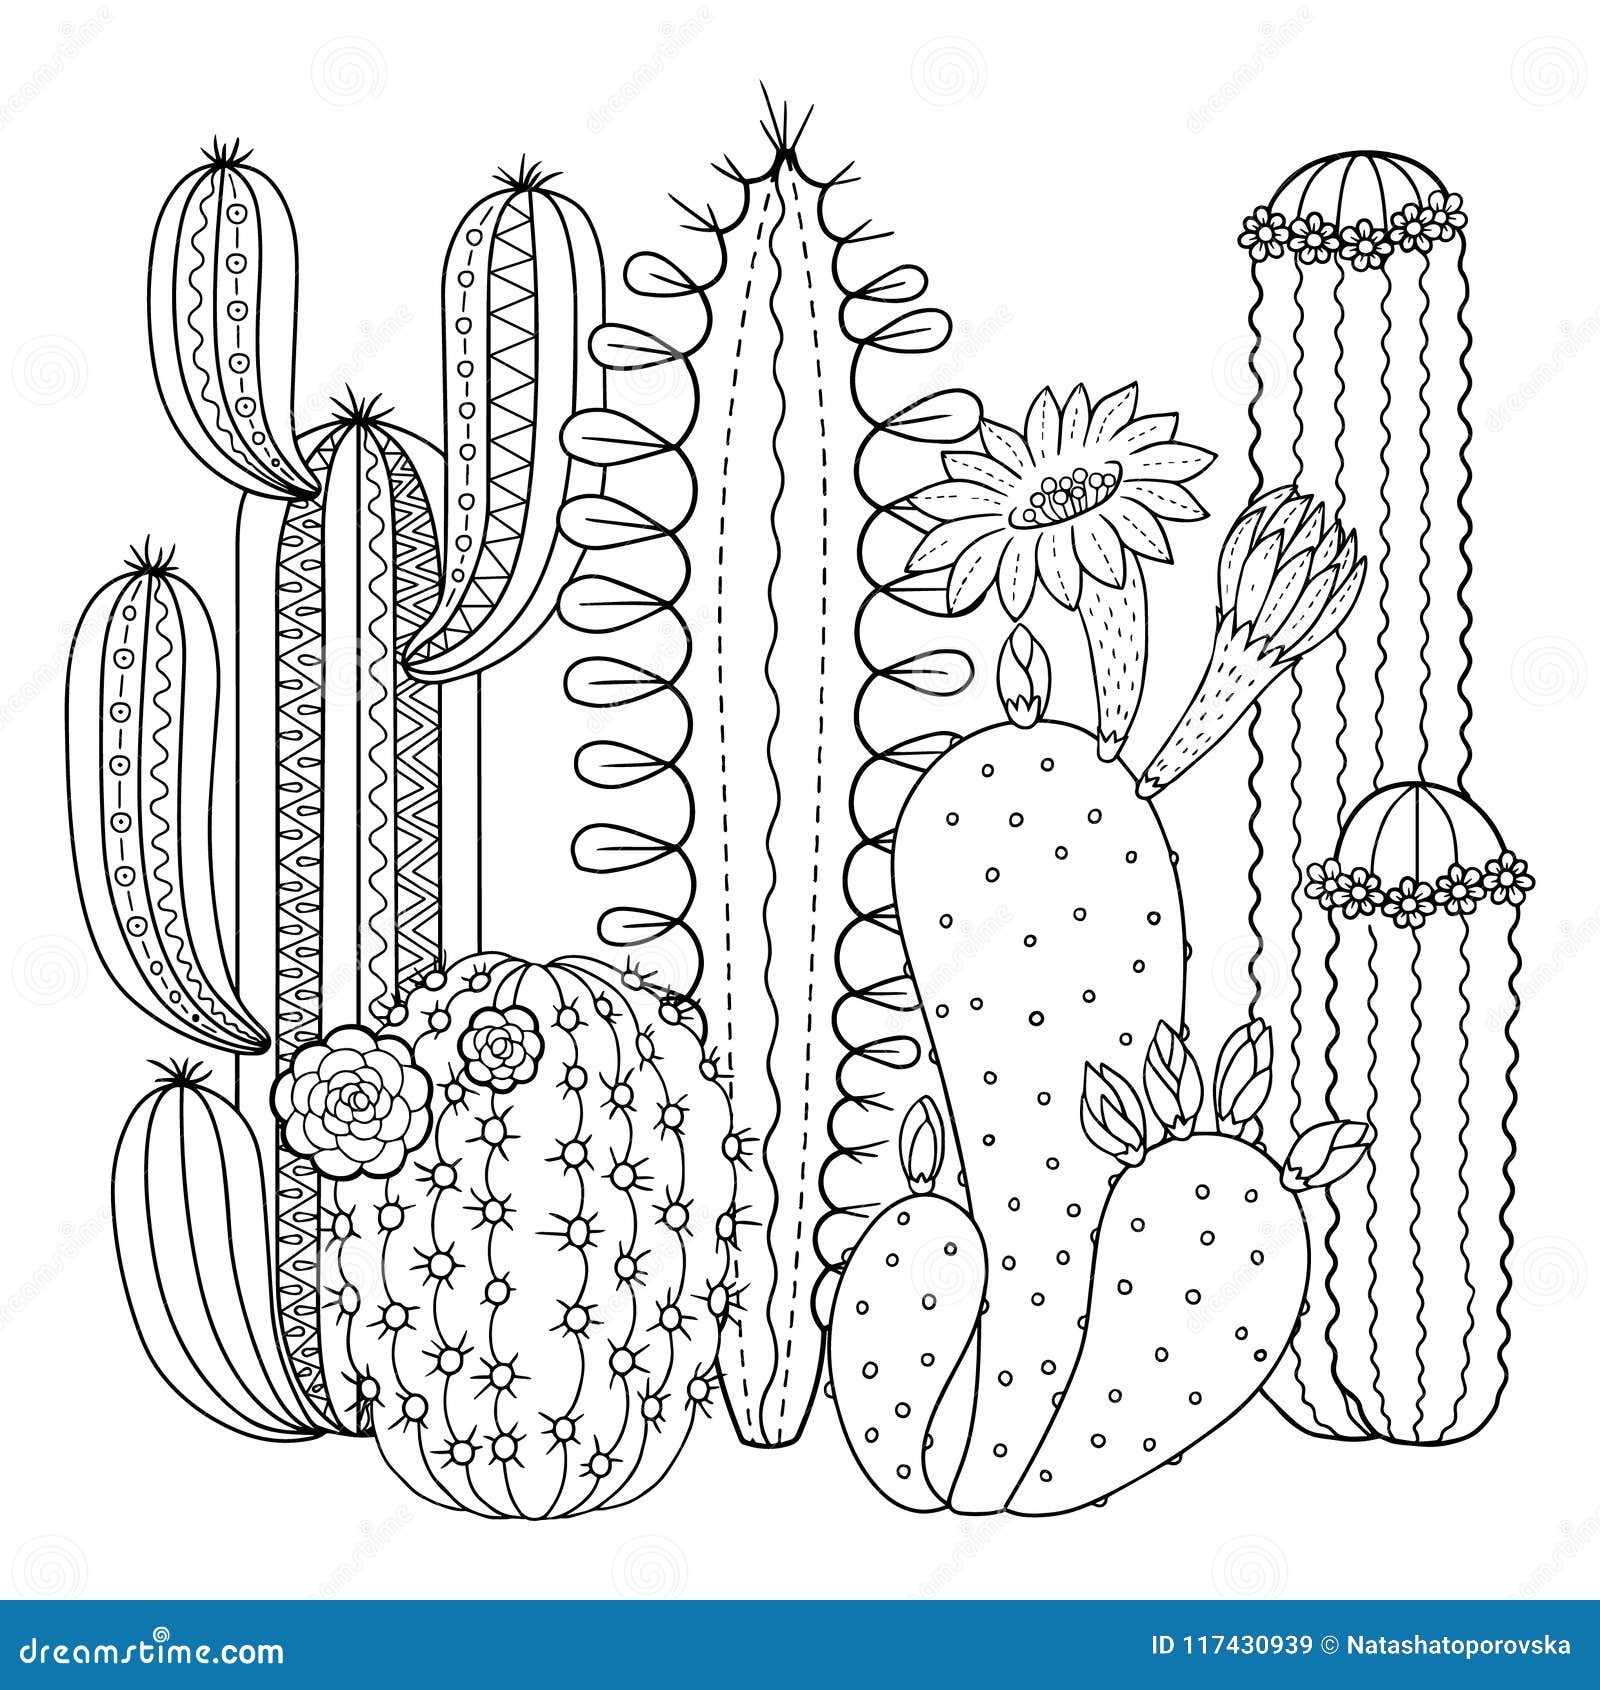 Vector coloring page linear image on white background cute cactus for page for coloring book contour image of cactus scribble fo stock vector